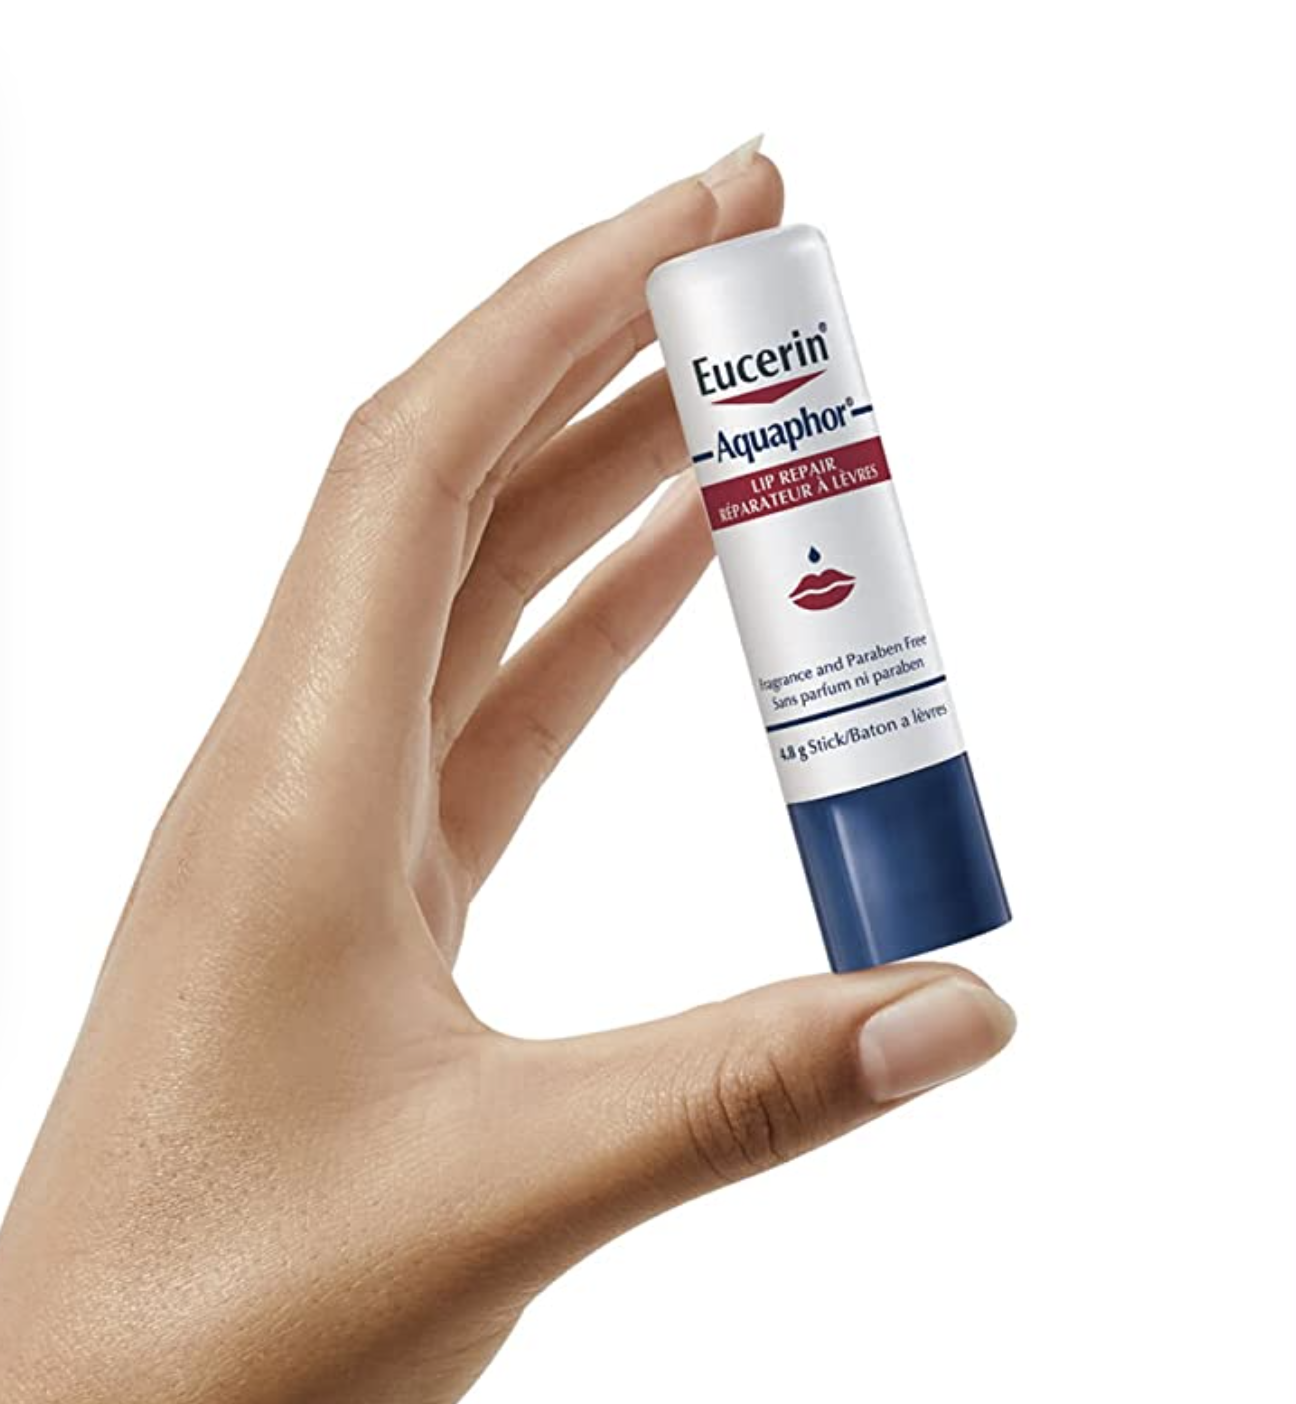 a hand holding the lip balm against a plain background